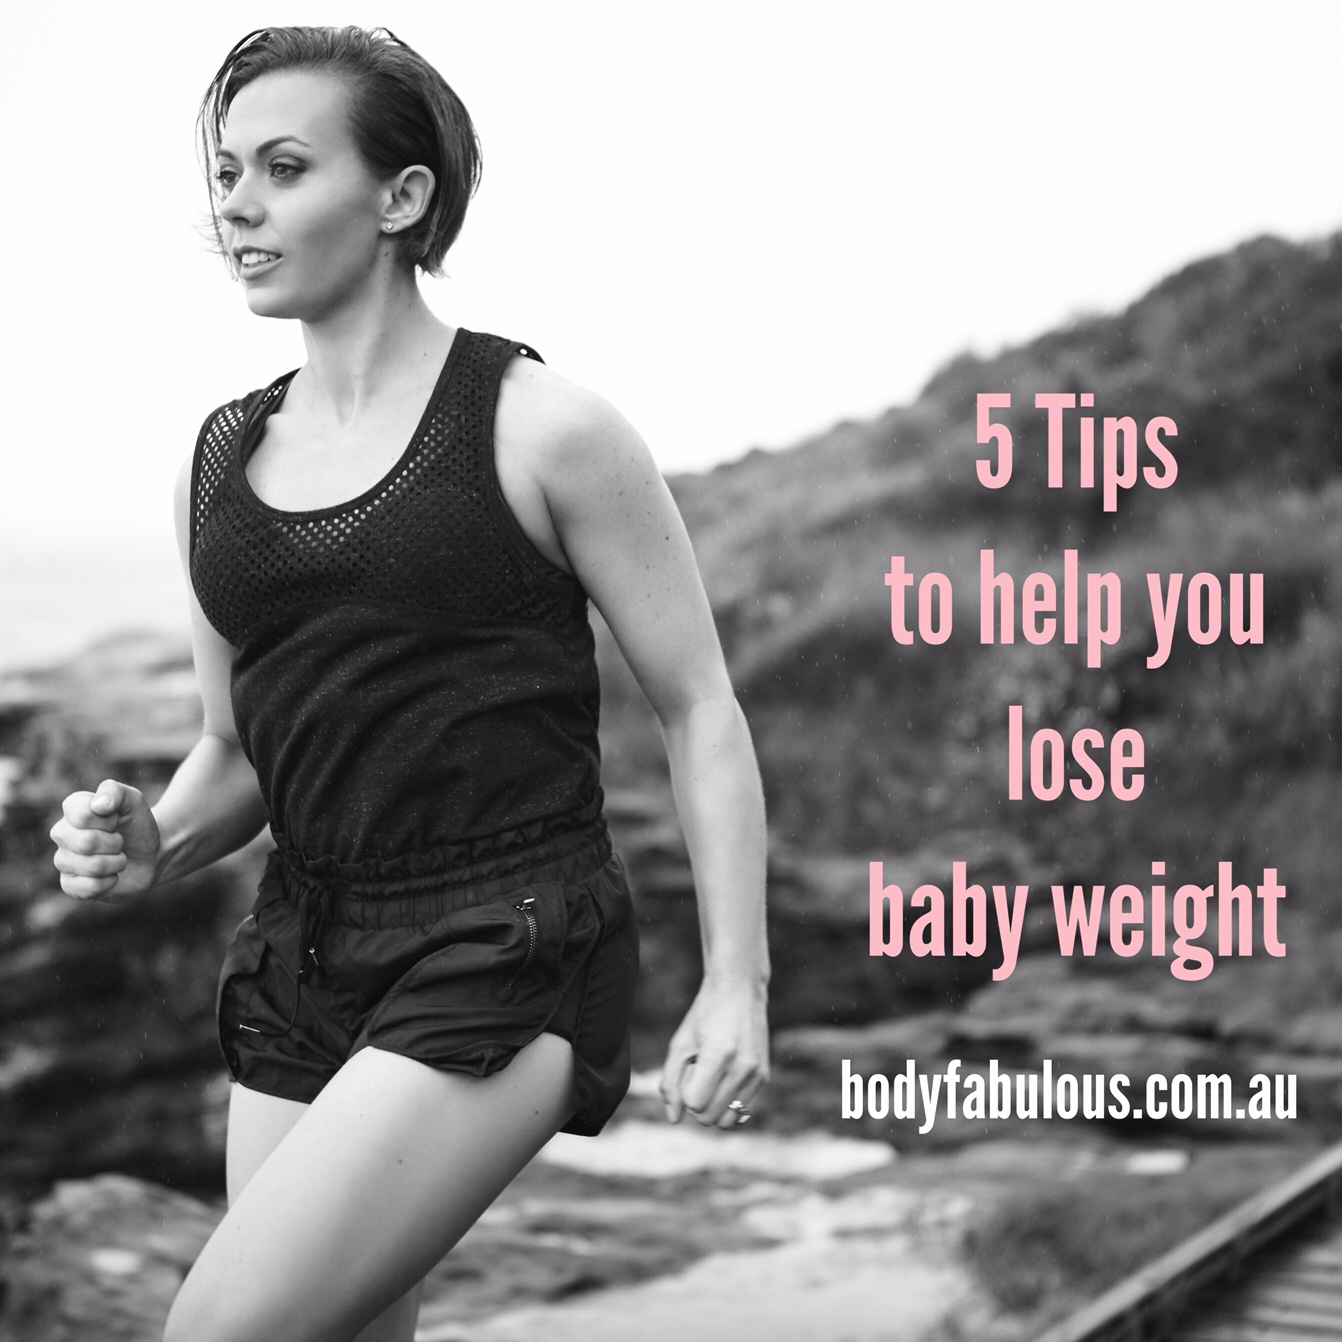 5 tips for losing baby weight